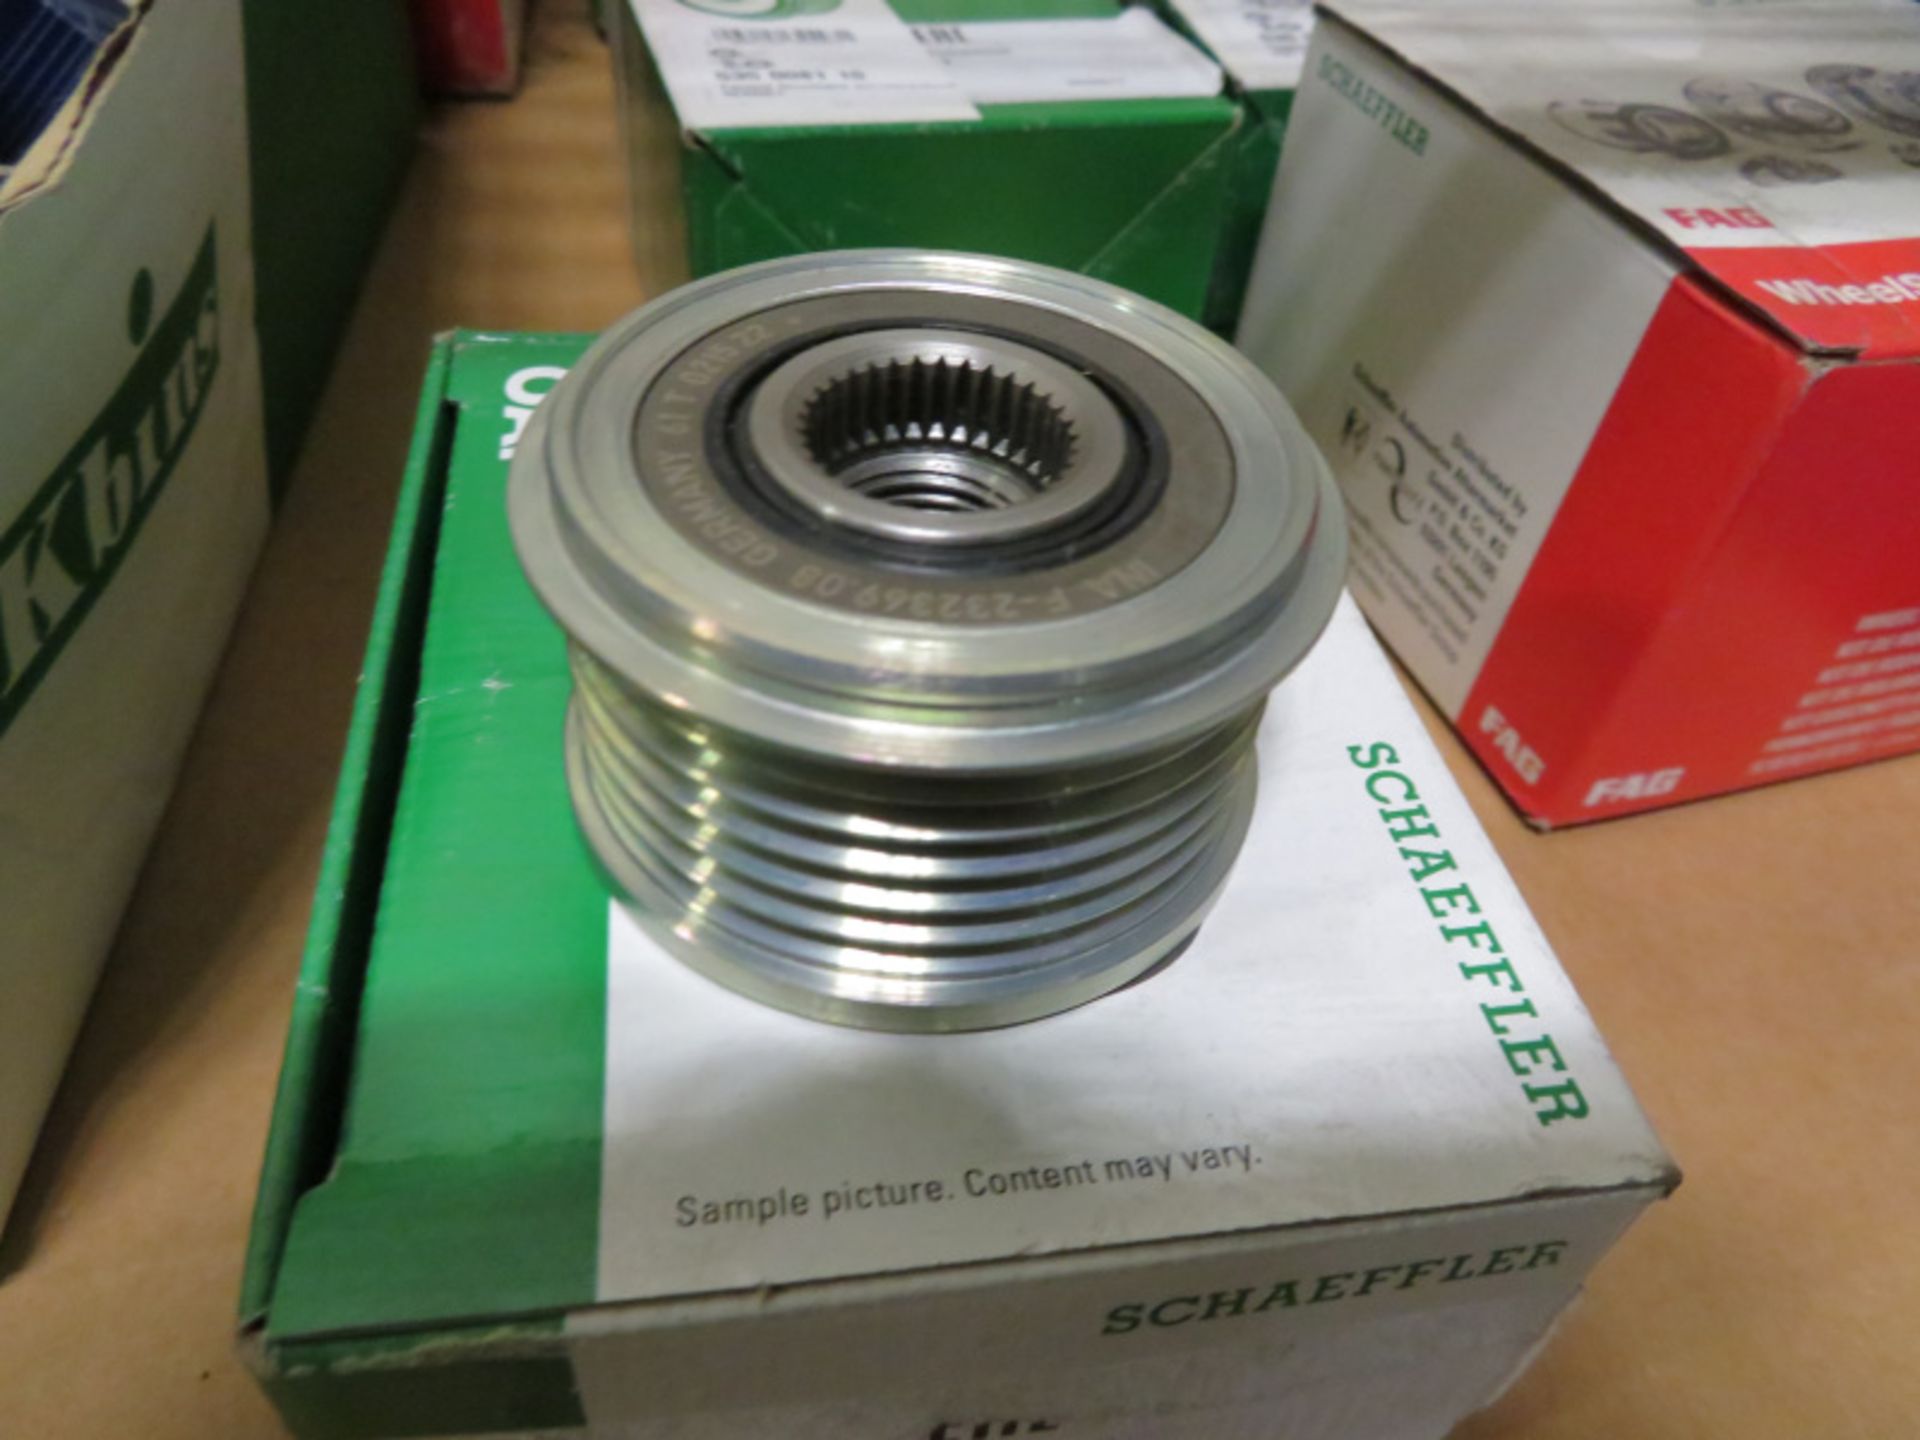 Vehicle parts - FAG, SKF, Bosch, Schaeffler - see pictures for models and types - Image 10 of 16